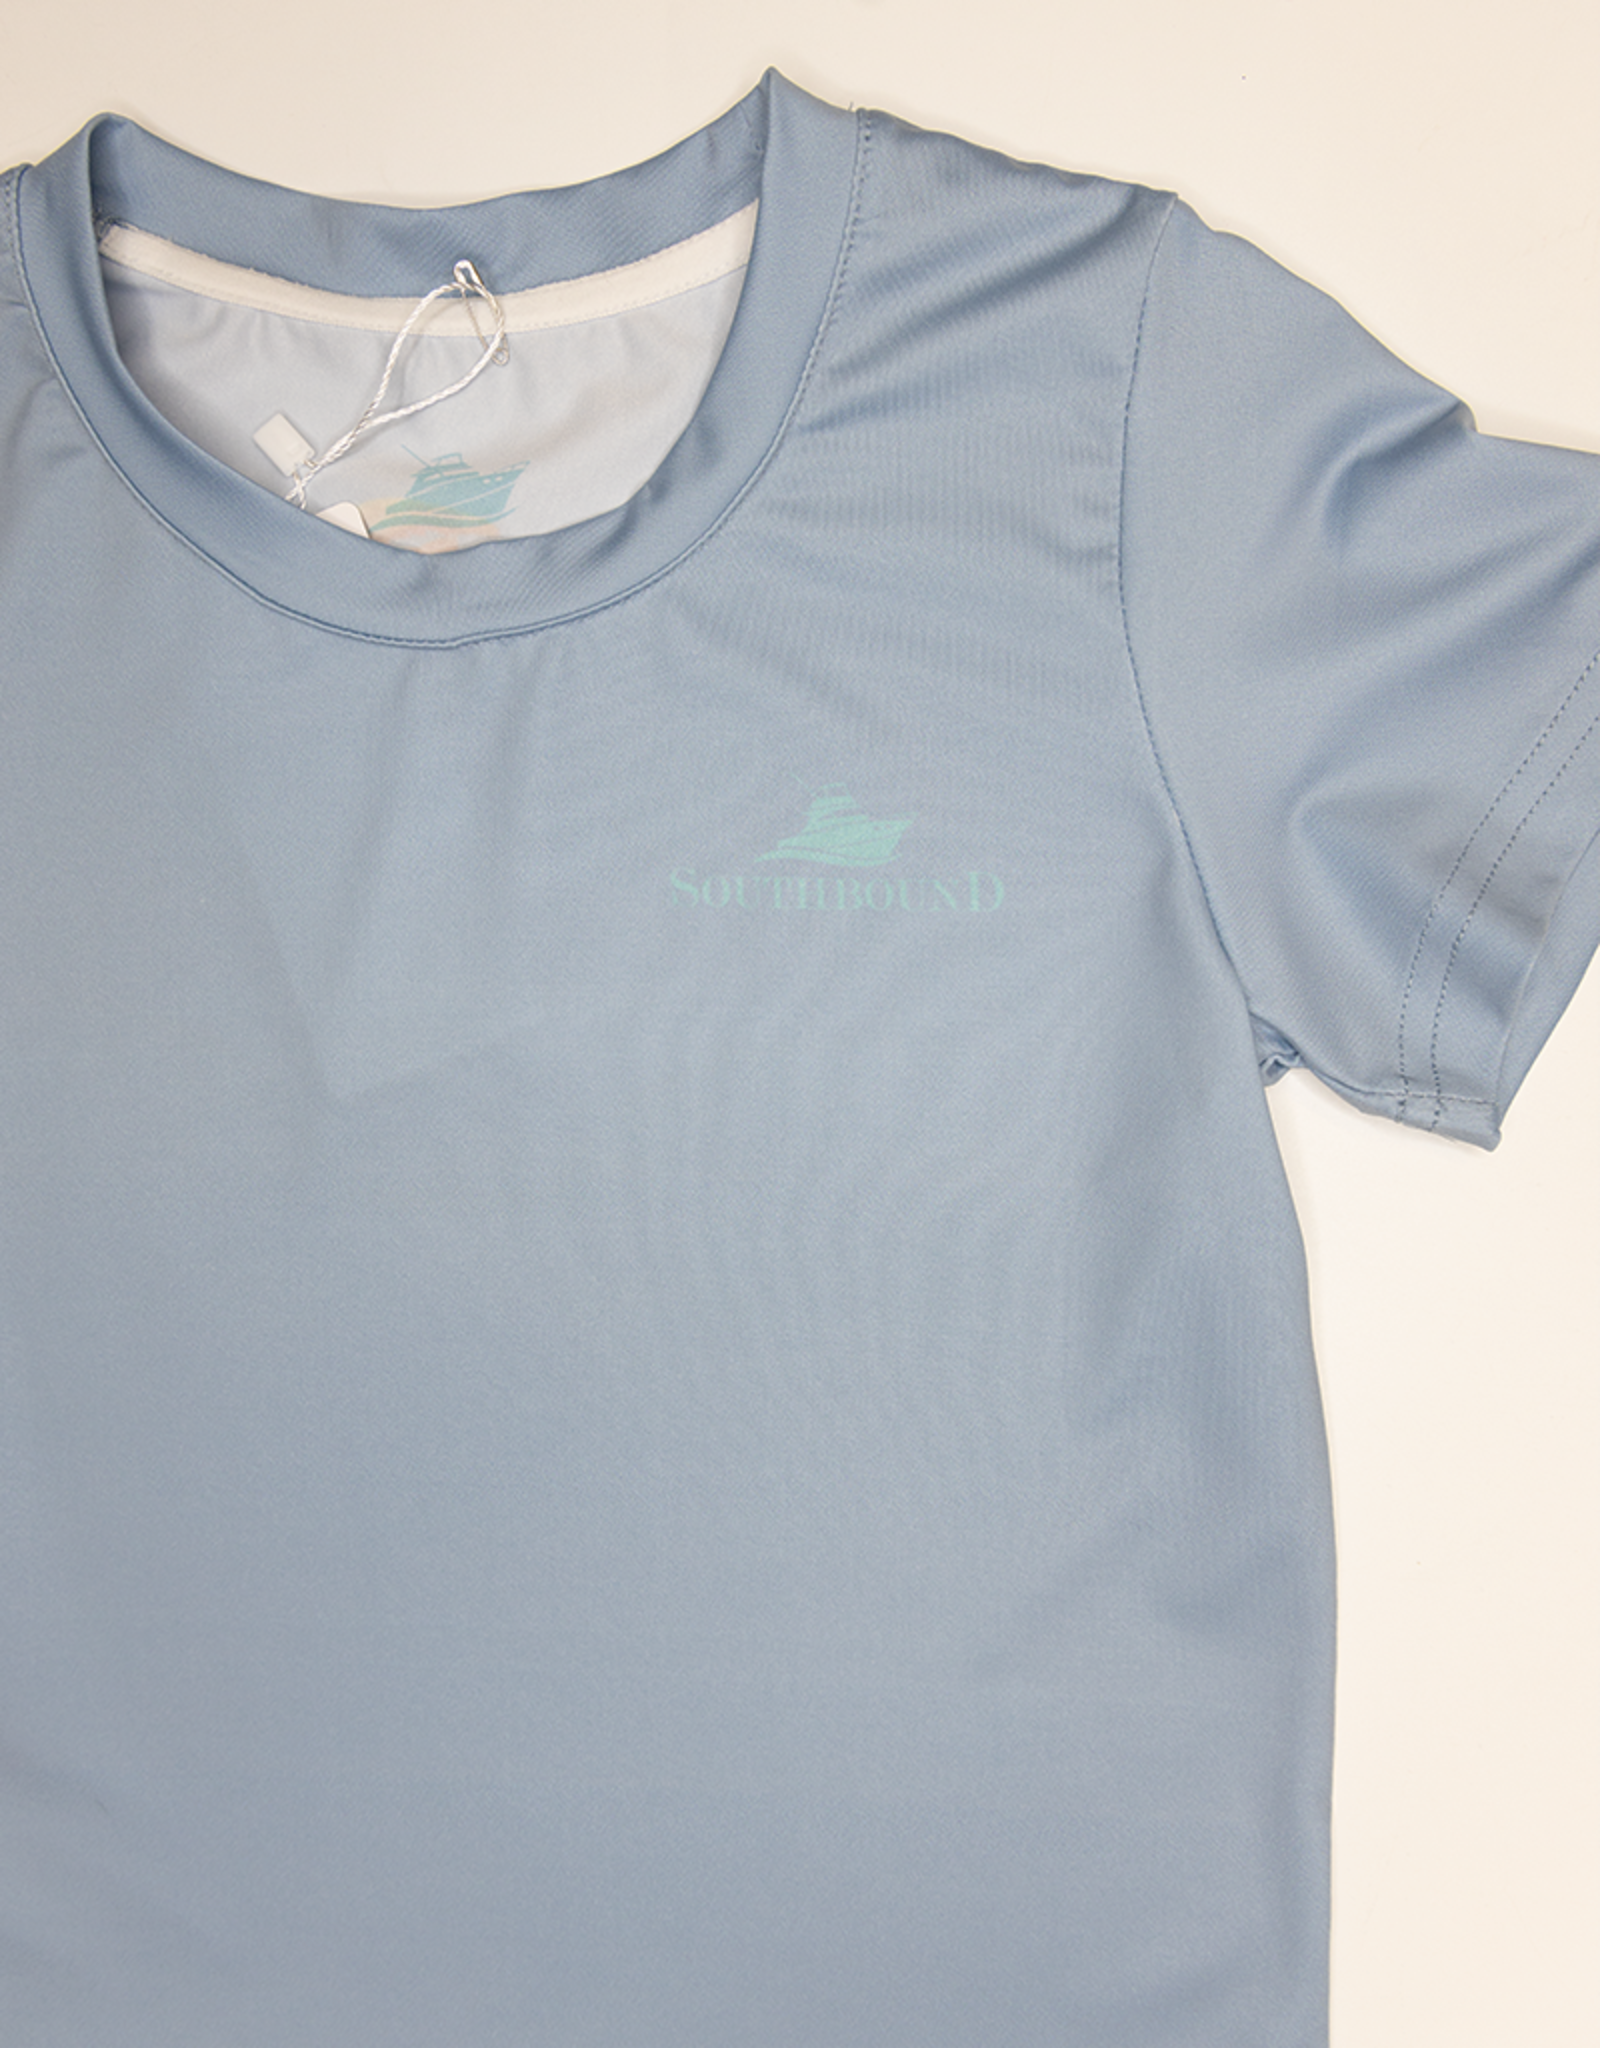 South Bound 3388 Performance Tee Blue Crab